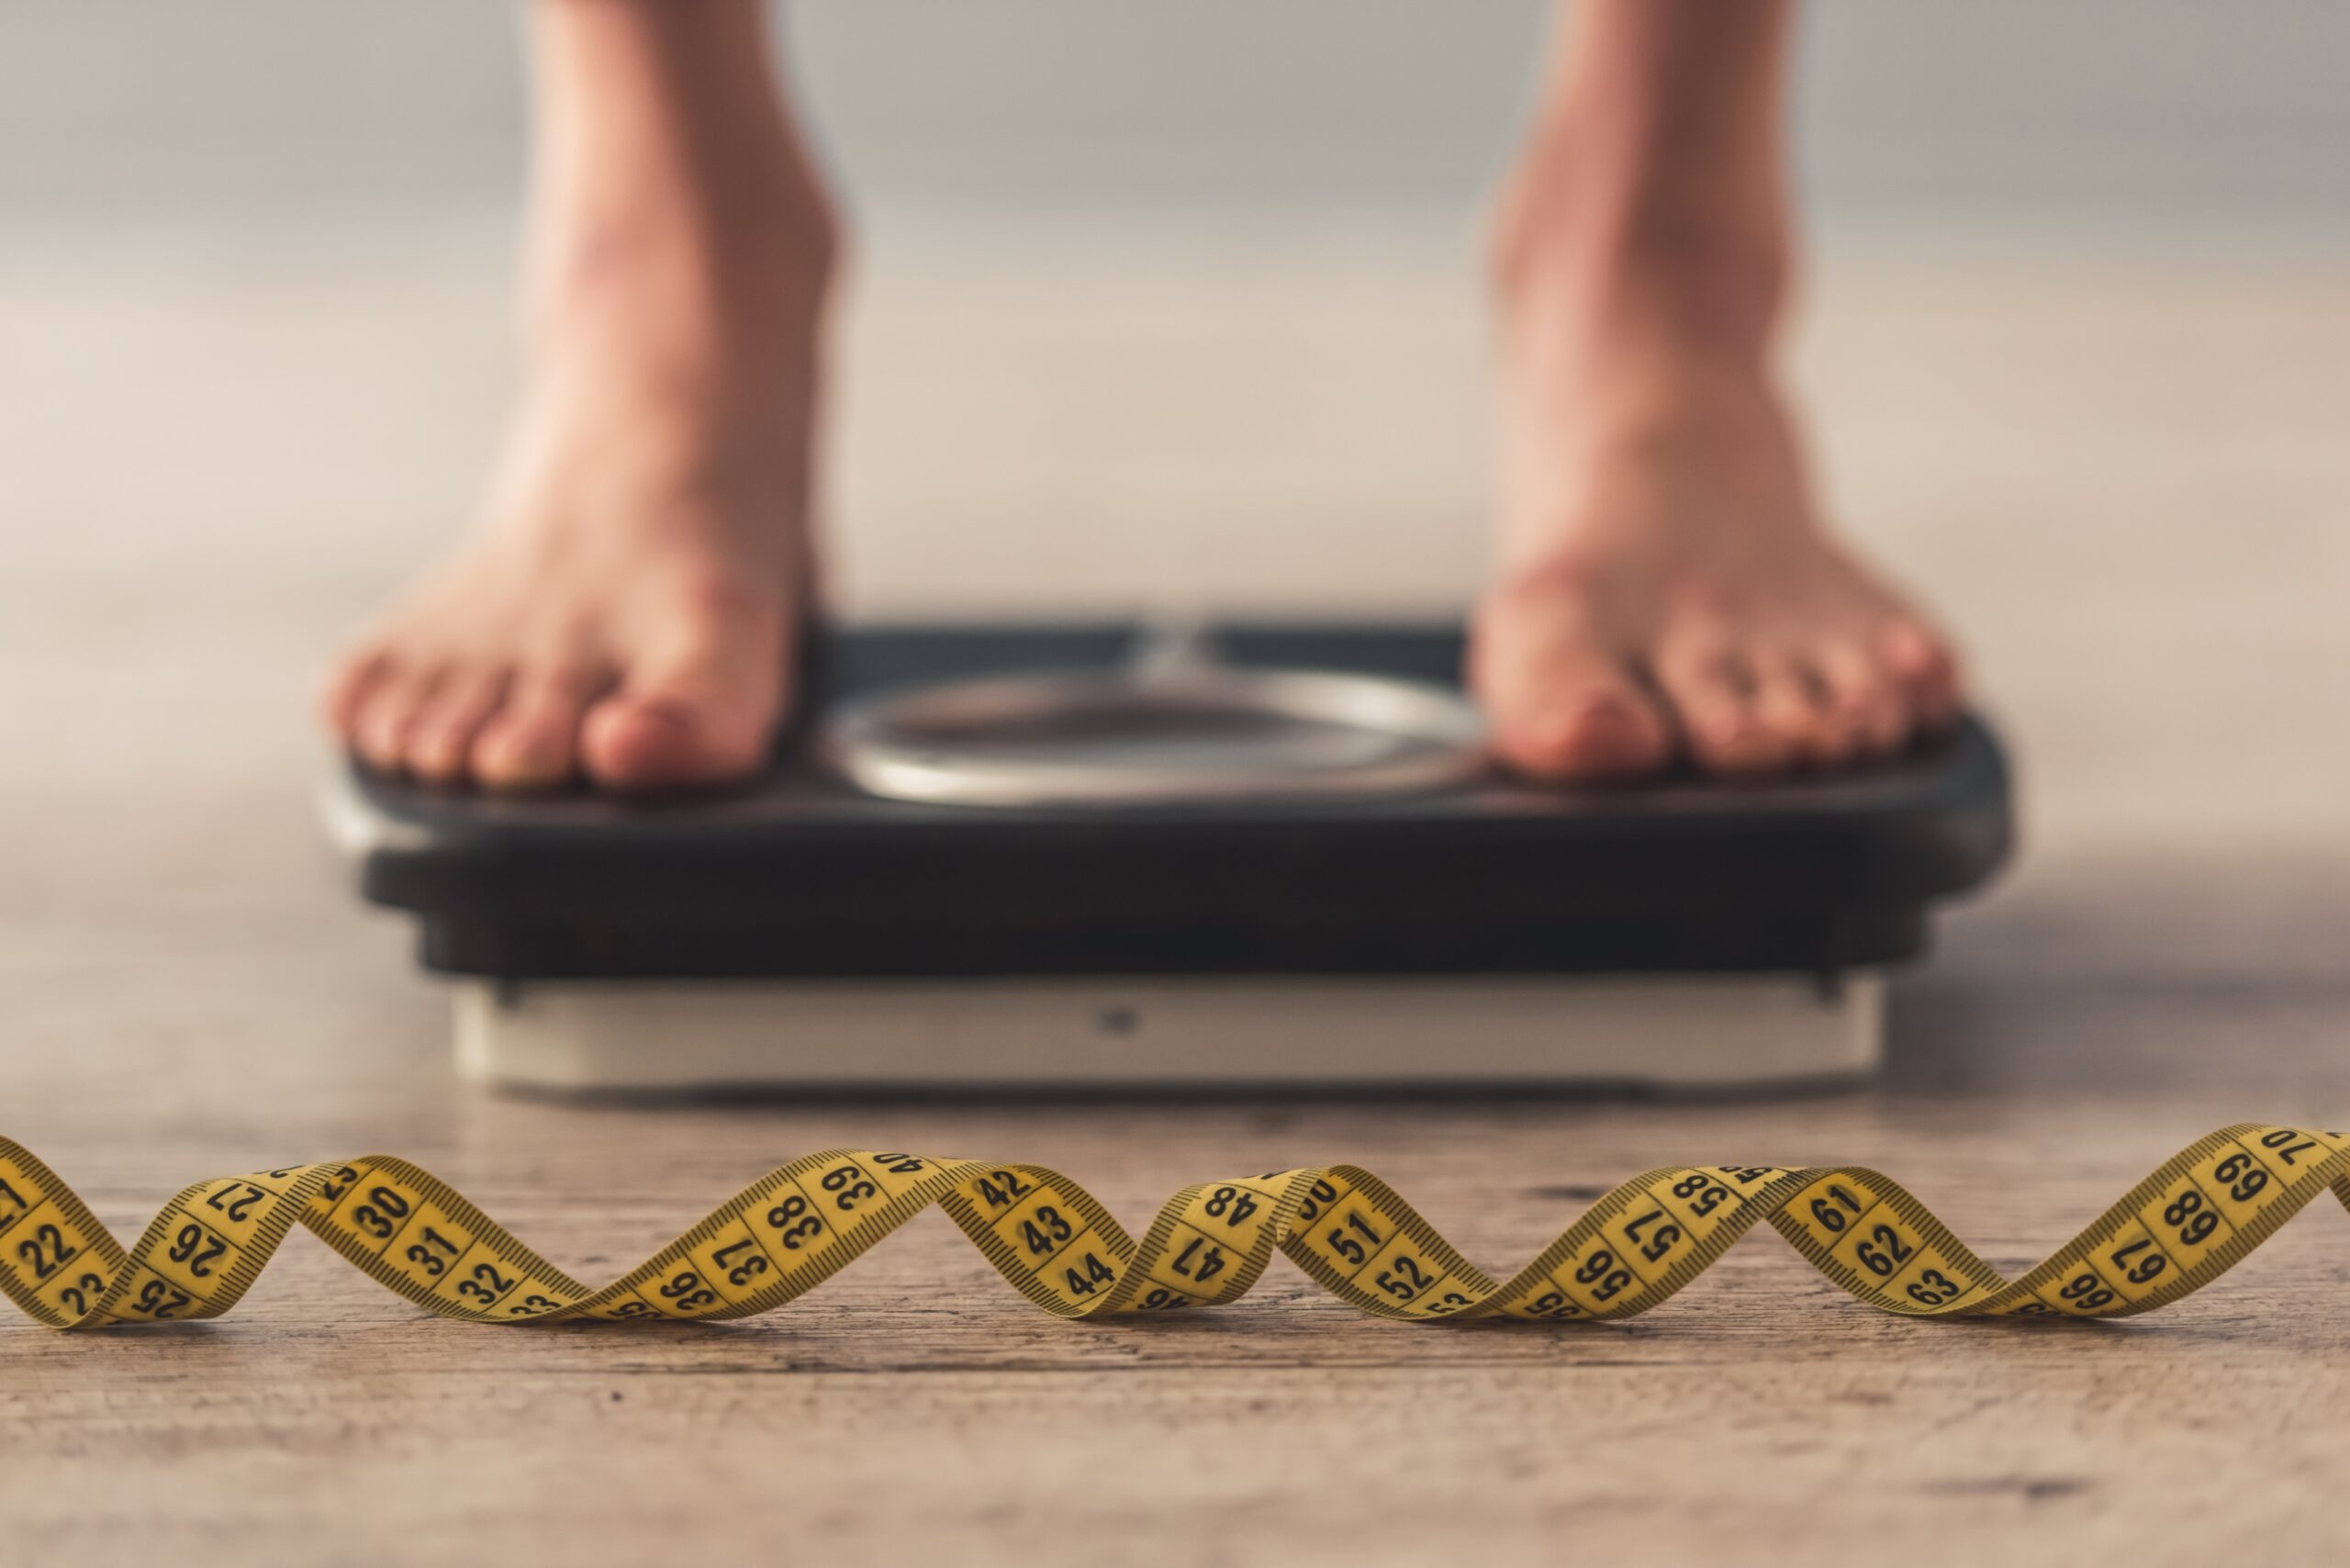 Is It Worth The Money To Pay For A Weight Loss Program?